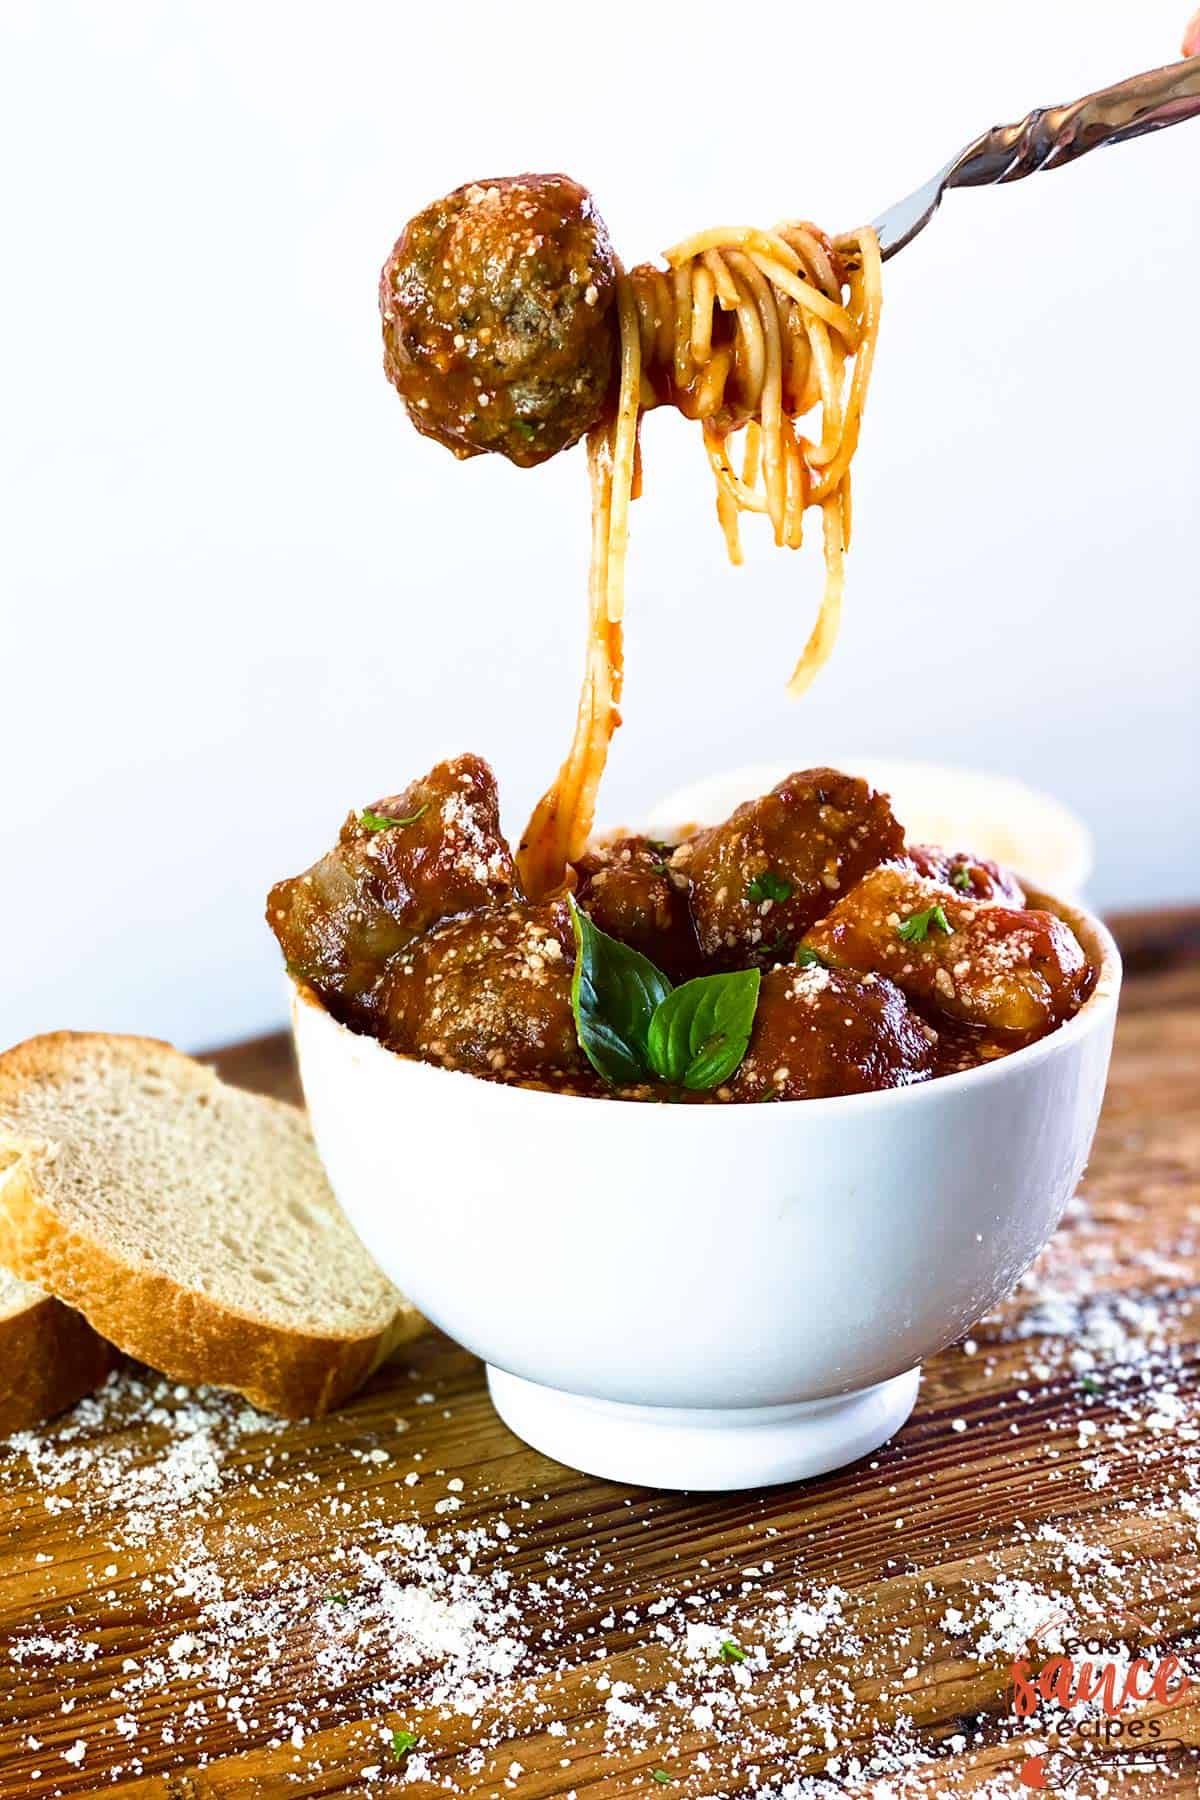 holding a meatball over a bowl of meatballs with sauce and pasta